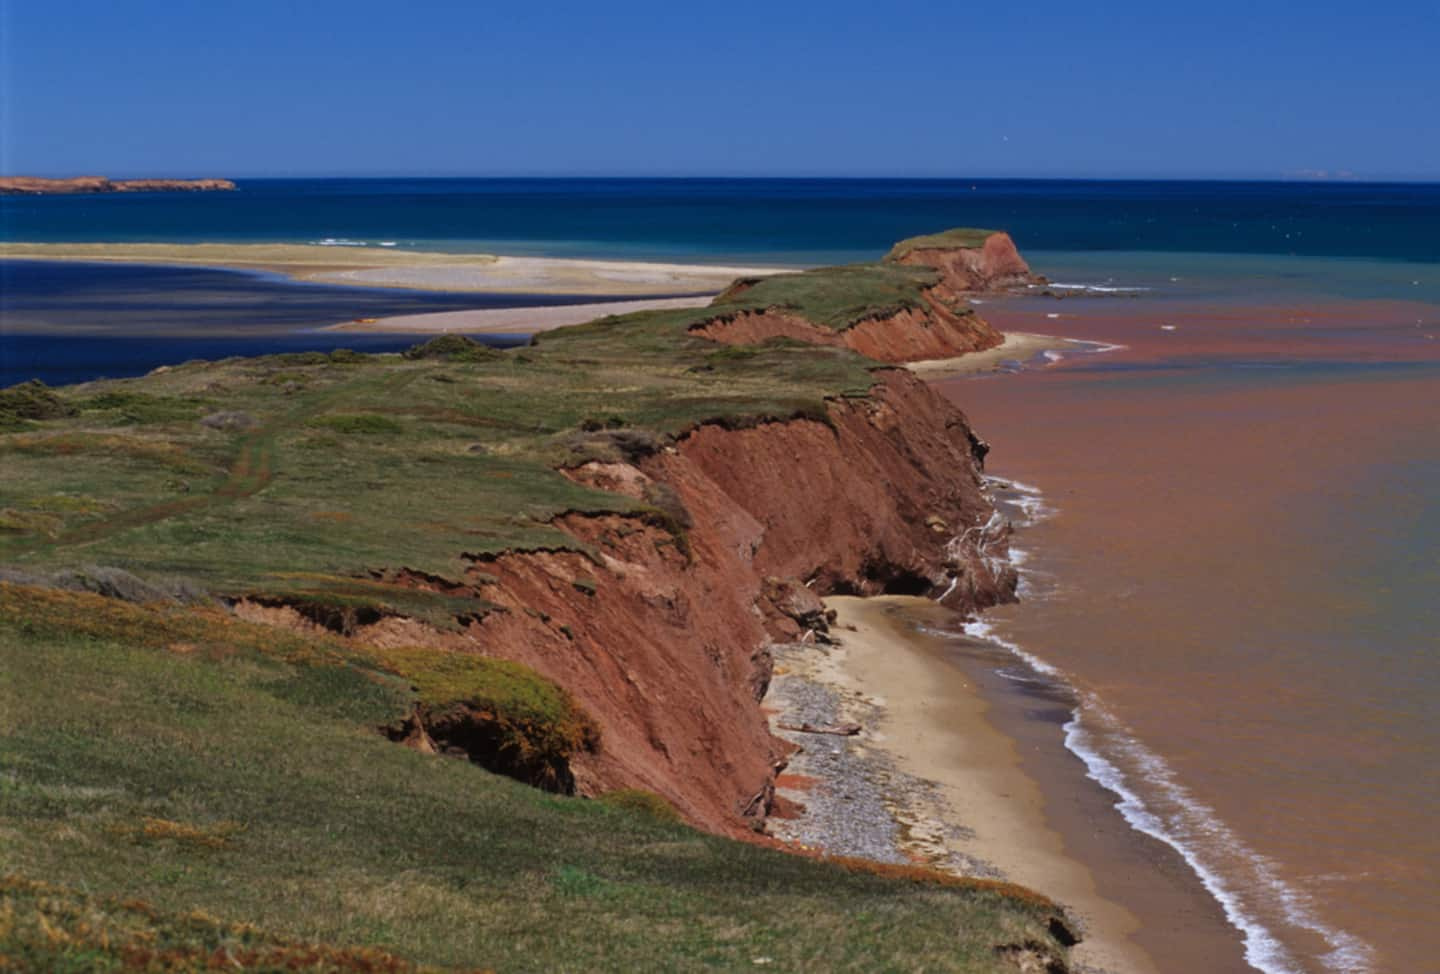 Three ideas for a trip to the Îles-de-la-Madeleine this summer